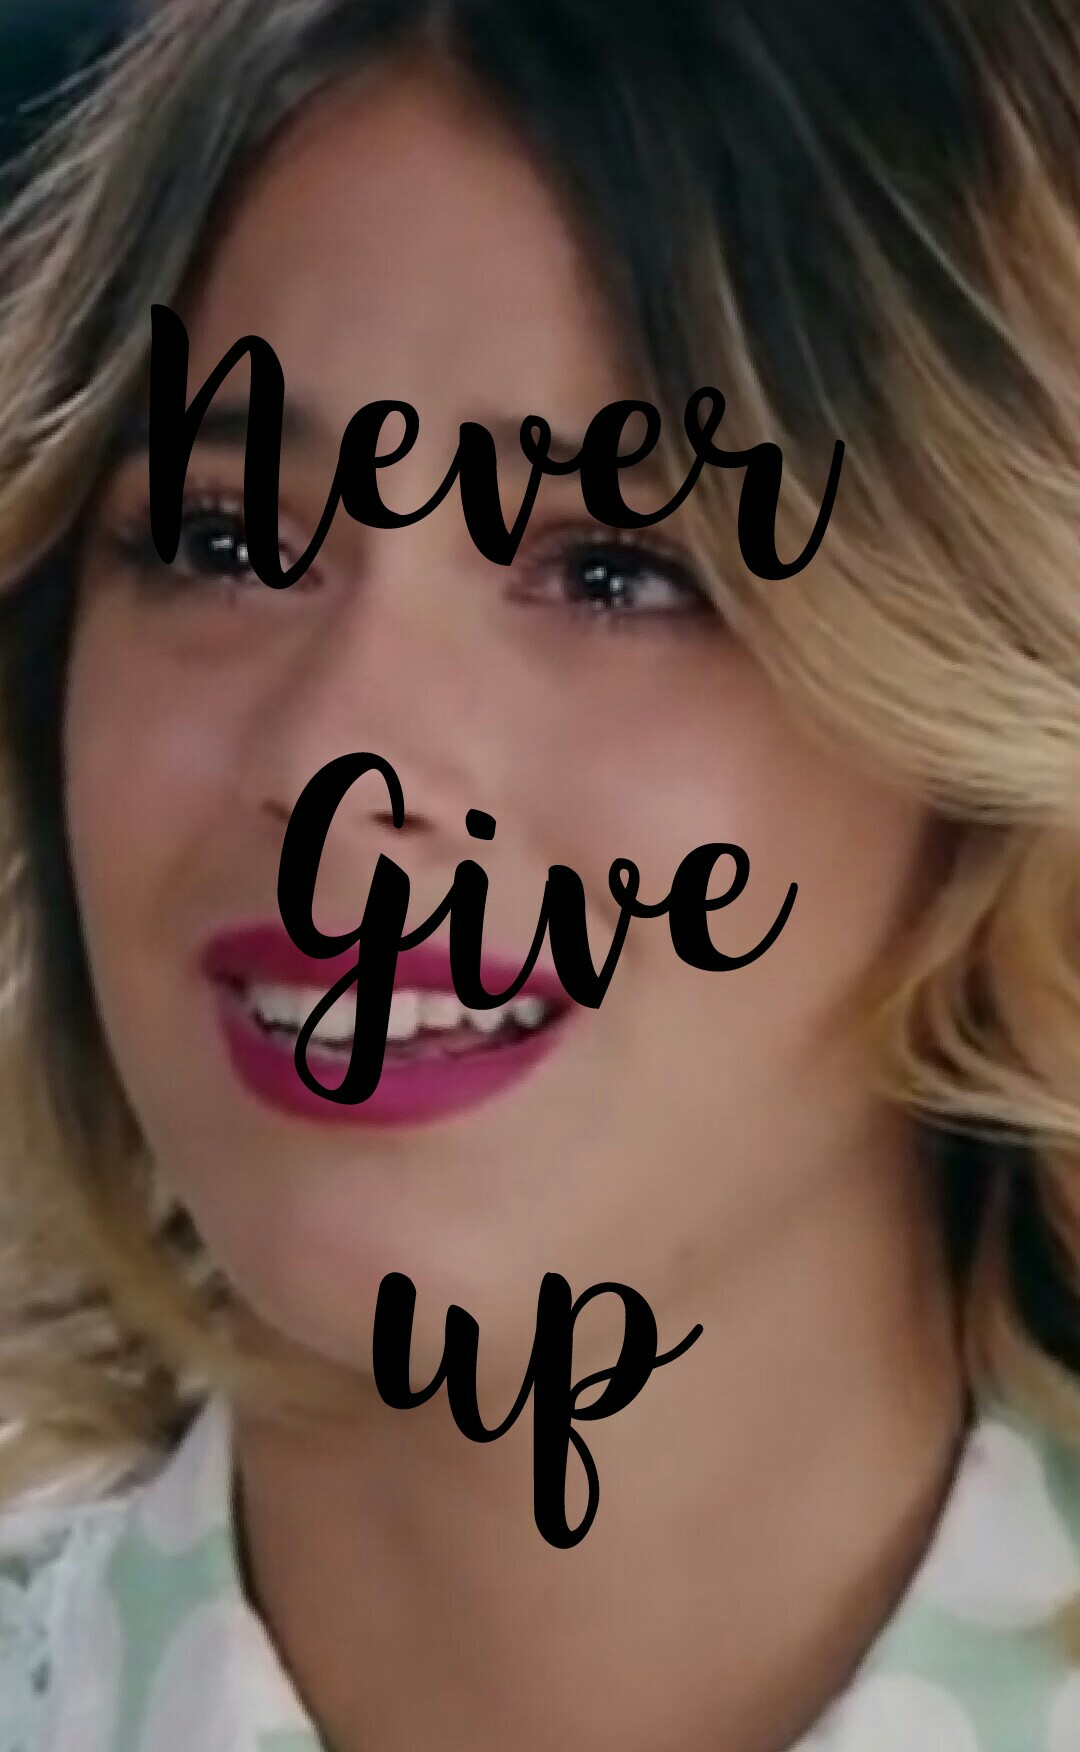 Guys,never give up don't care what other people say. Fight for your dreams and believe in them♡